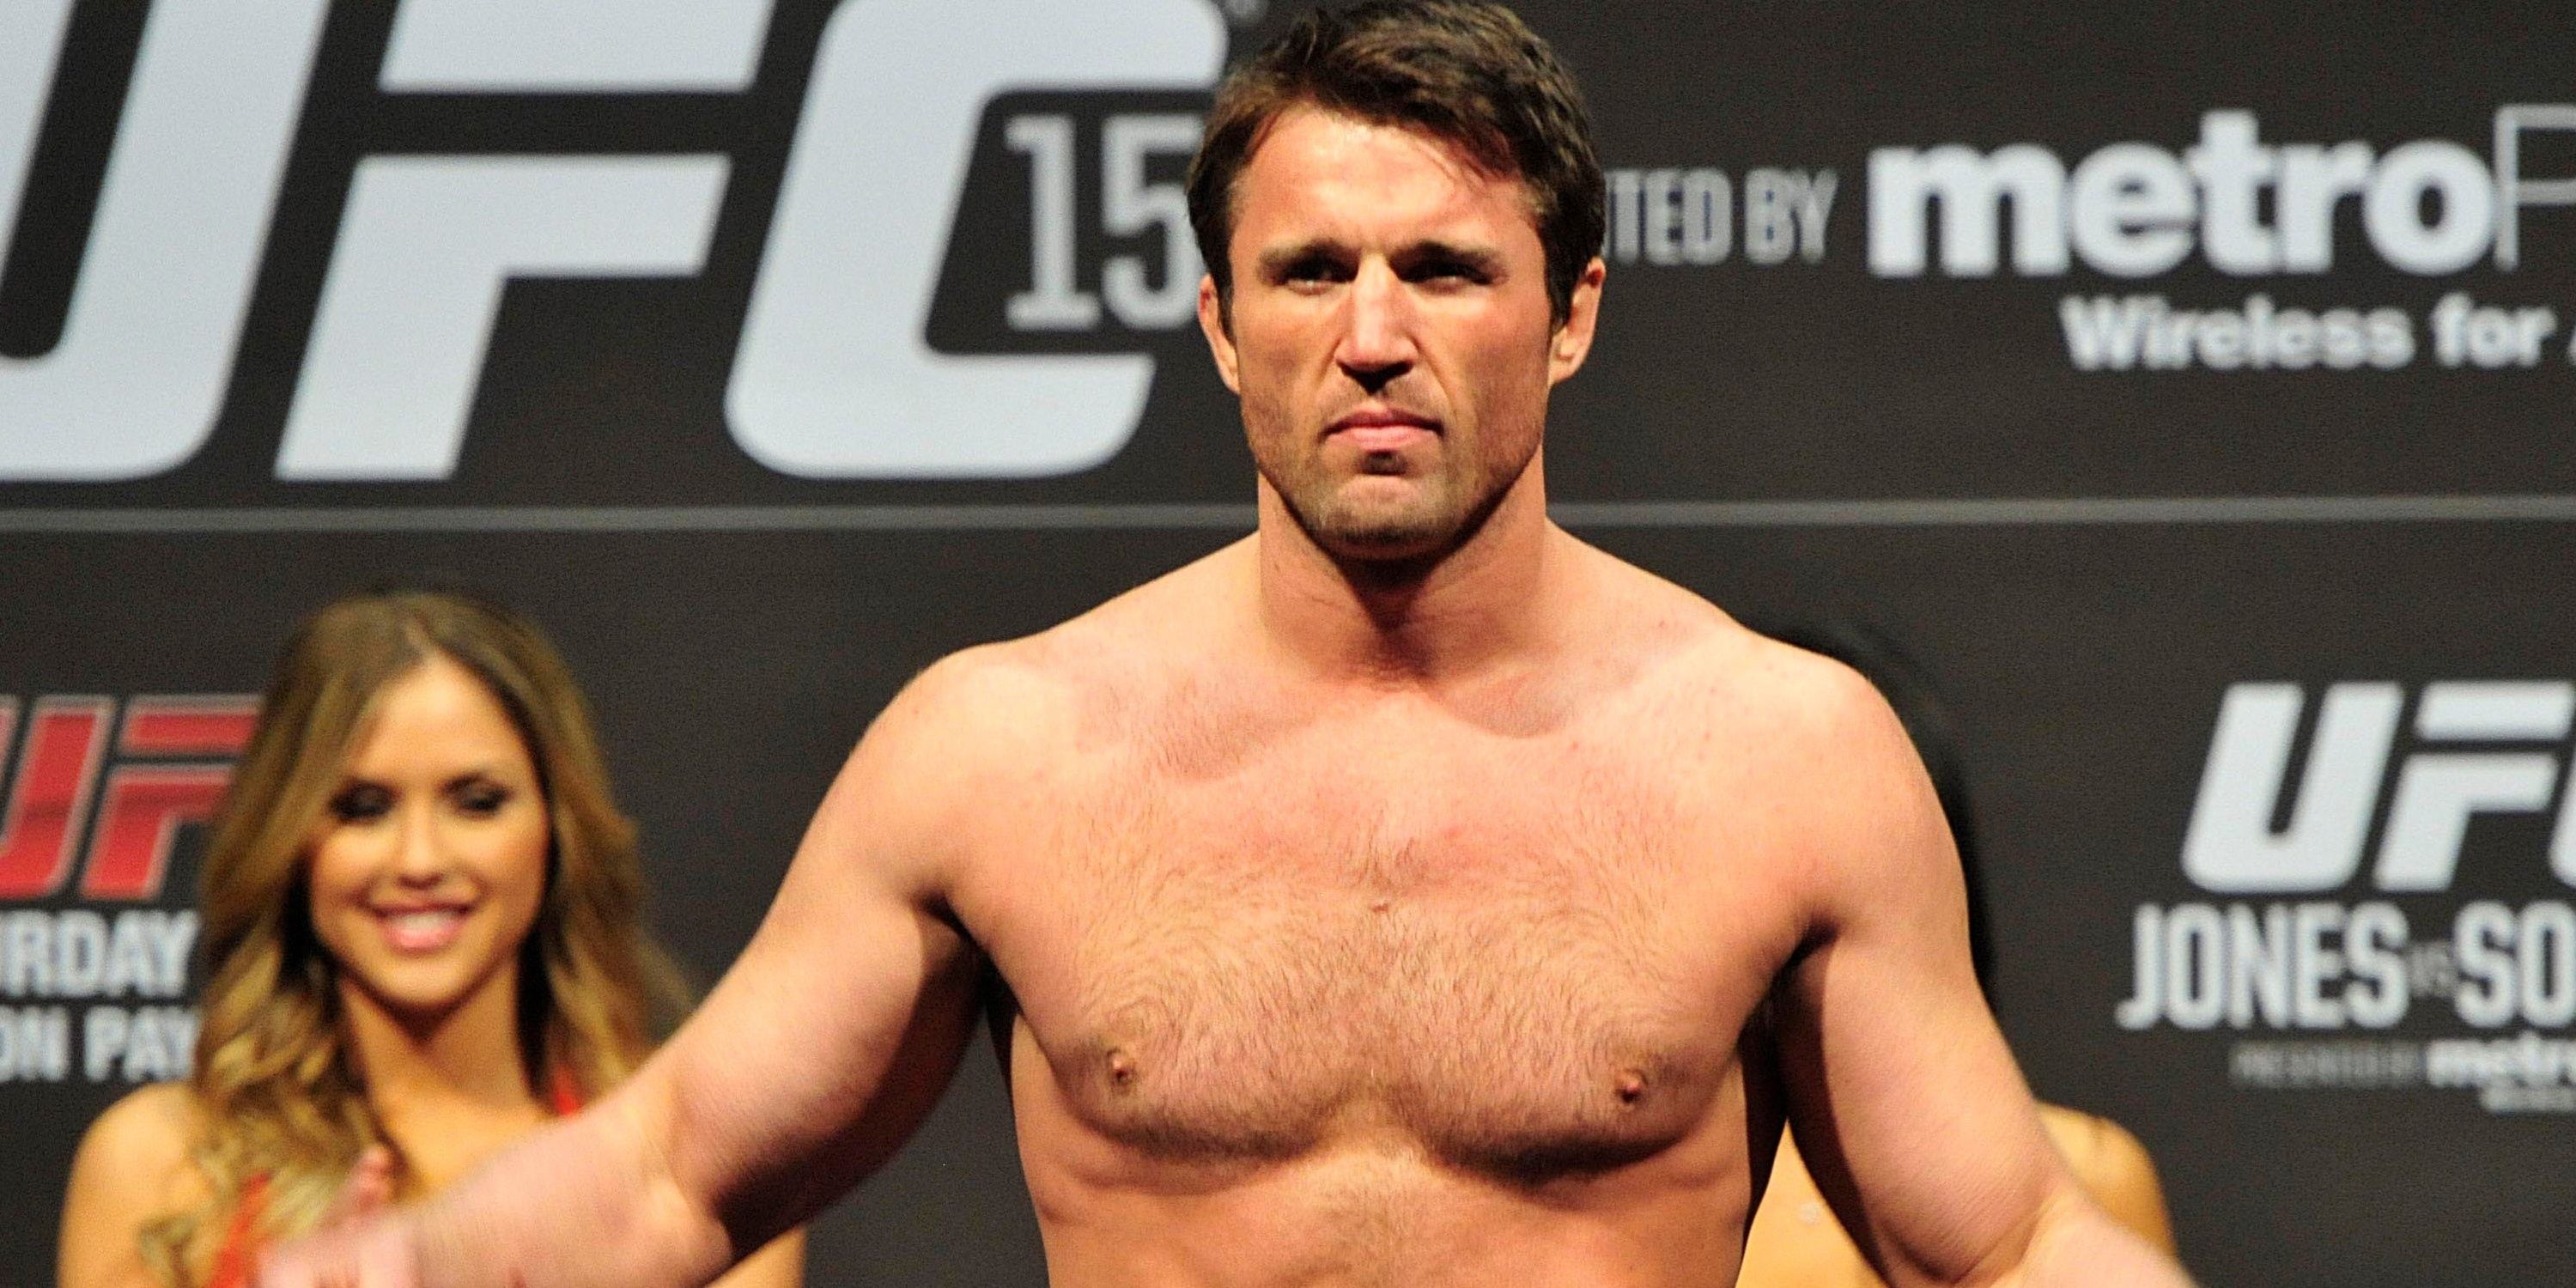 Chael Sonnen at the press conference Cropped